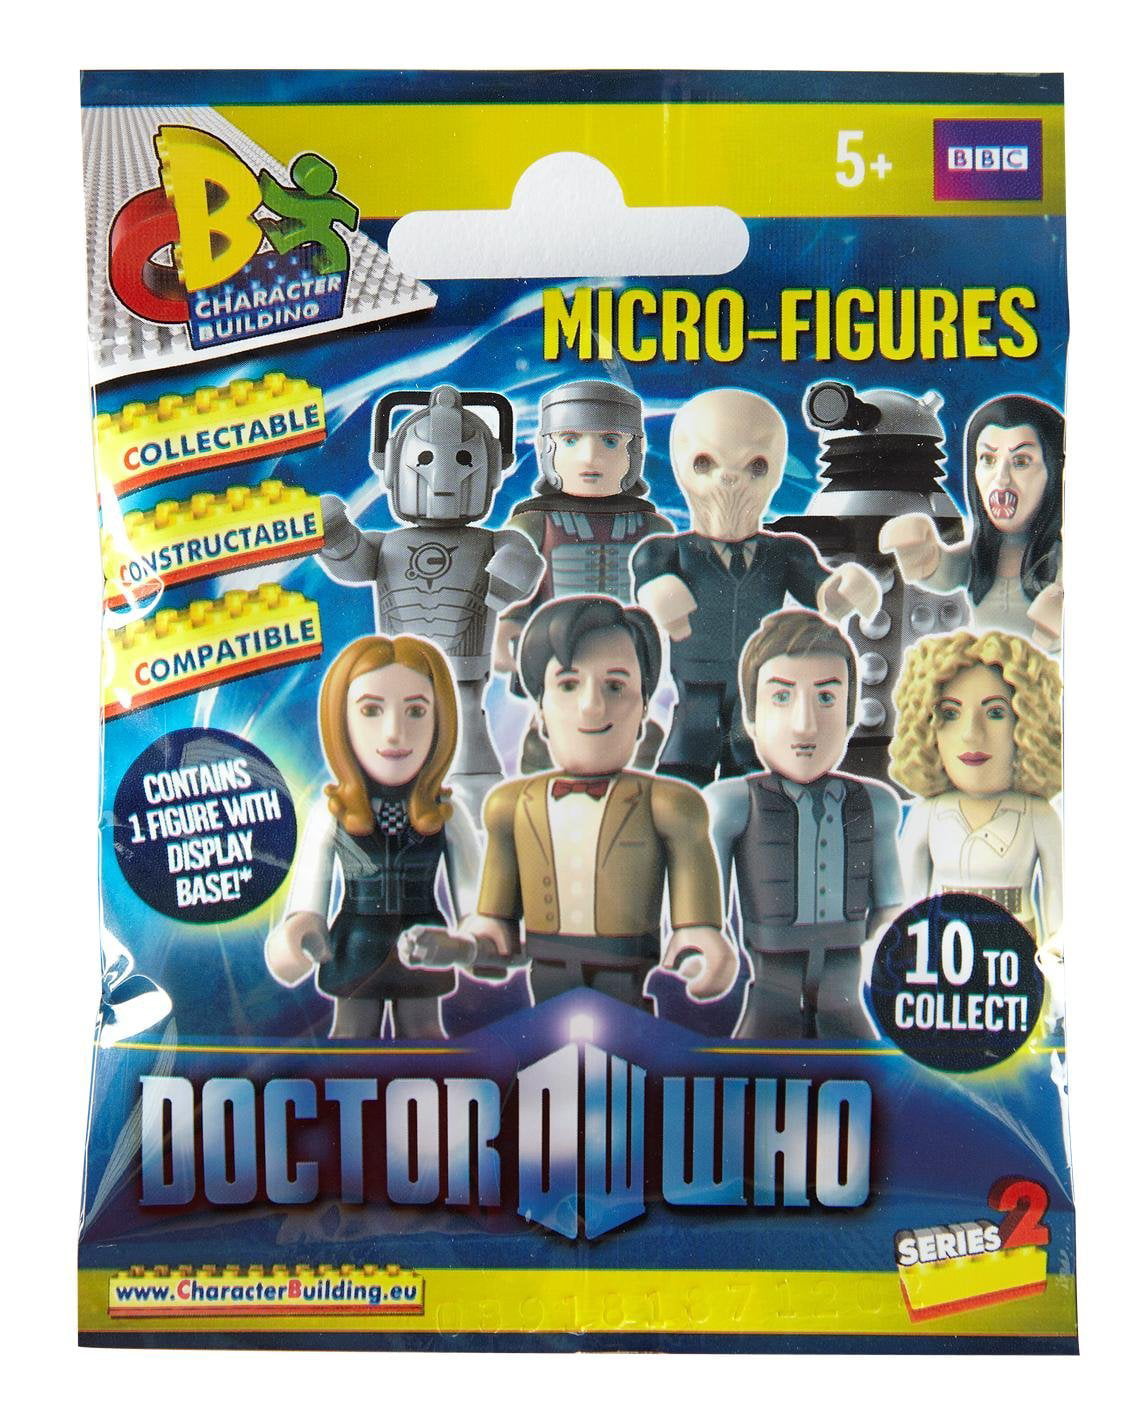 DOCTOR DR WHO Character Building Series 2 Choose from list 